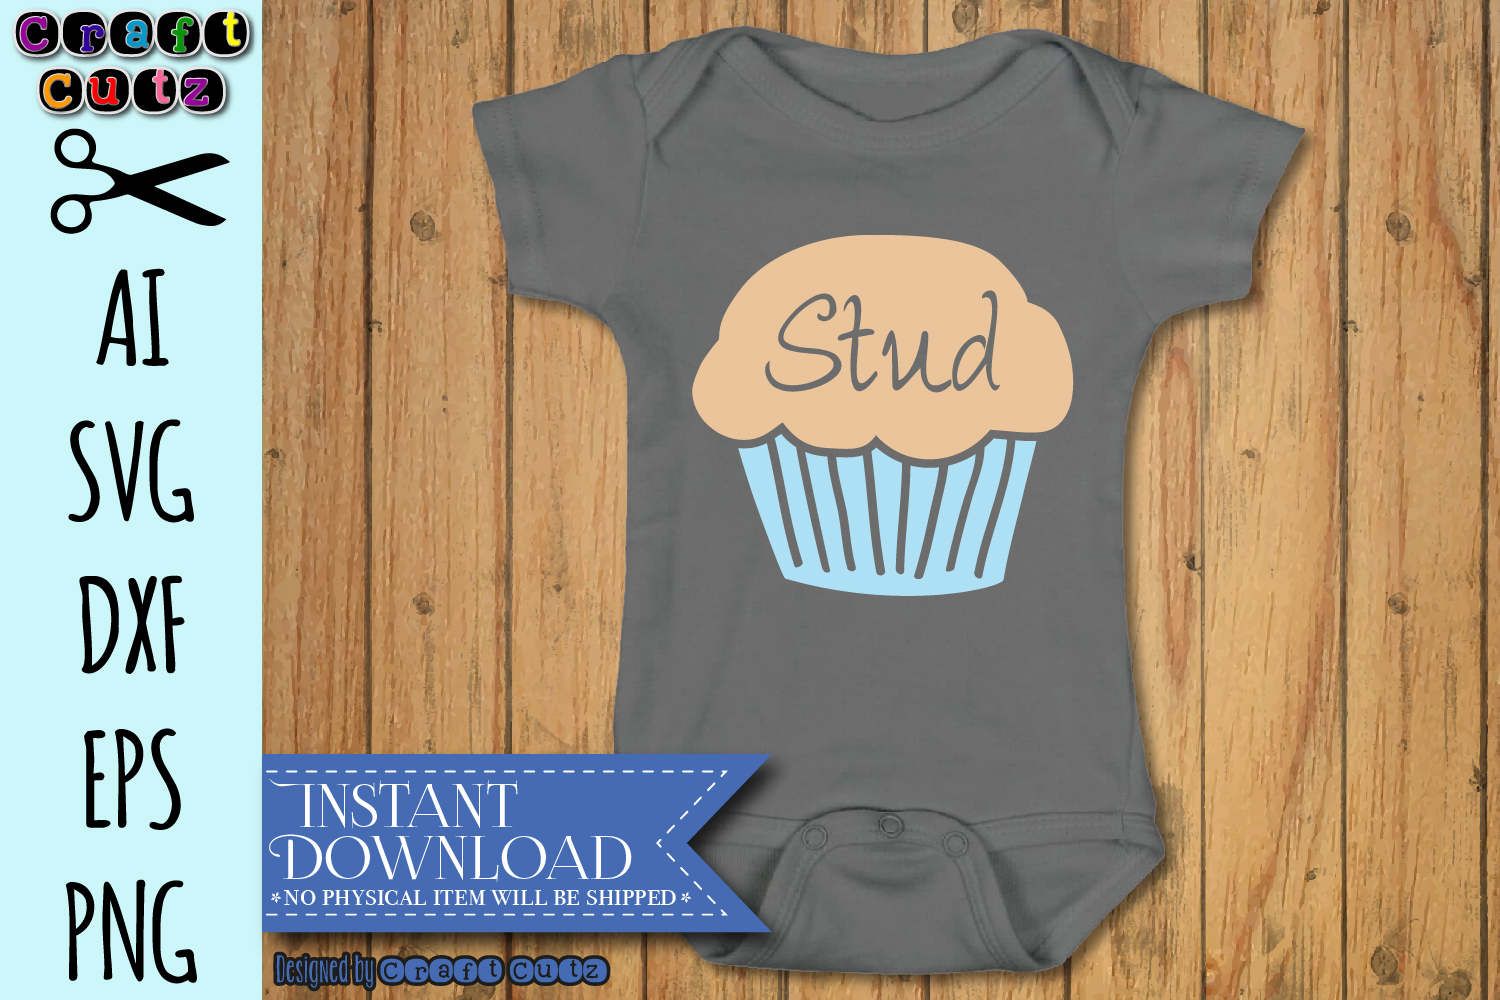 Download Stud Muffin SVG, Muffin DXF, Cute Toddler Shirt